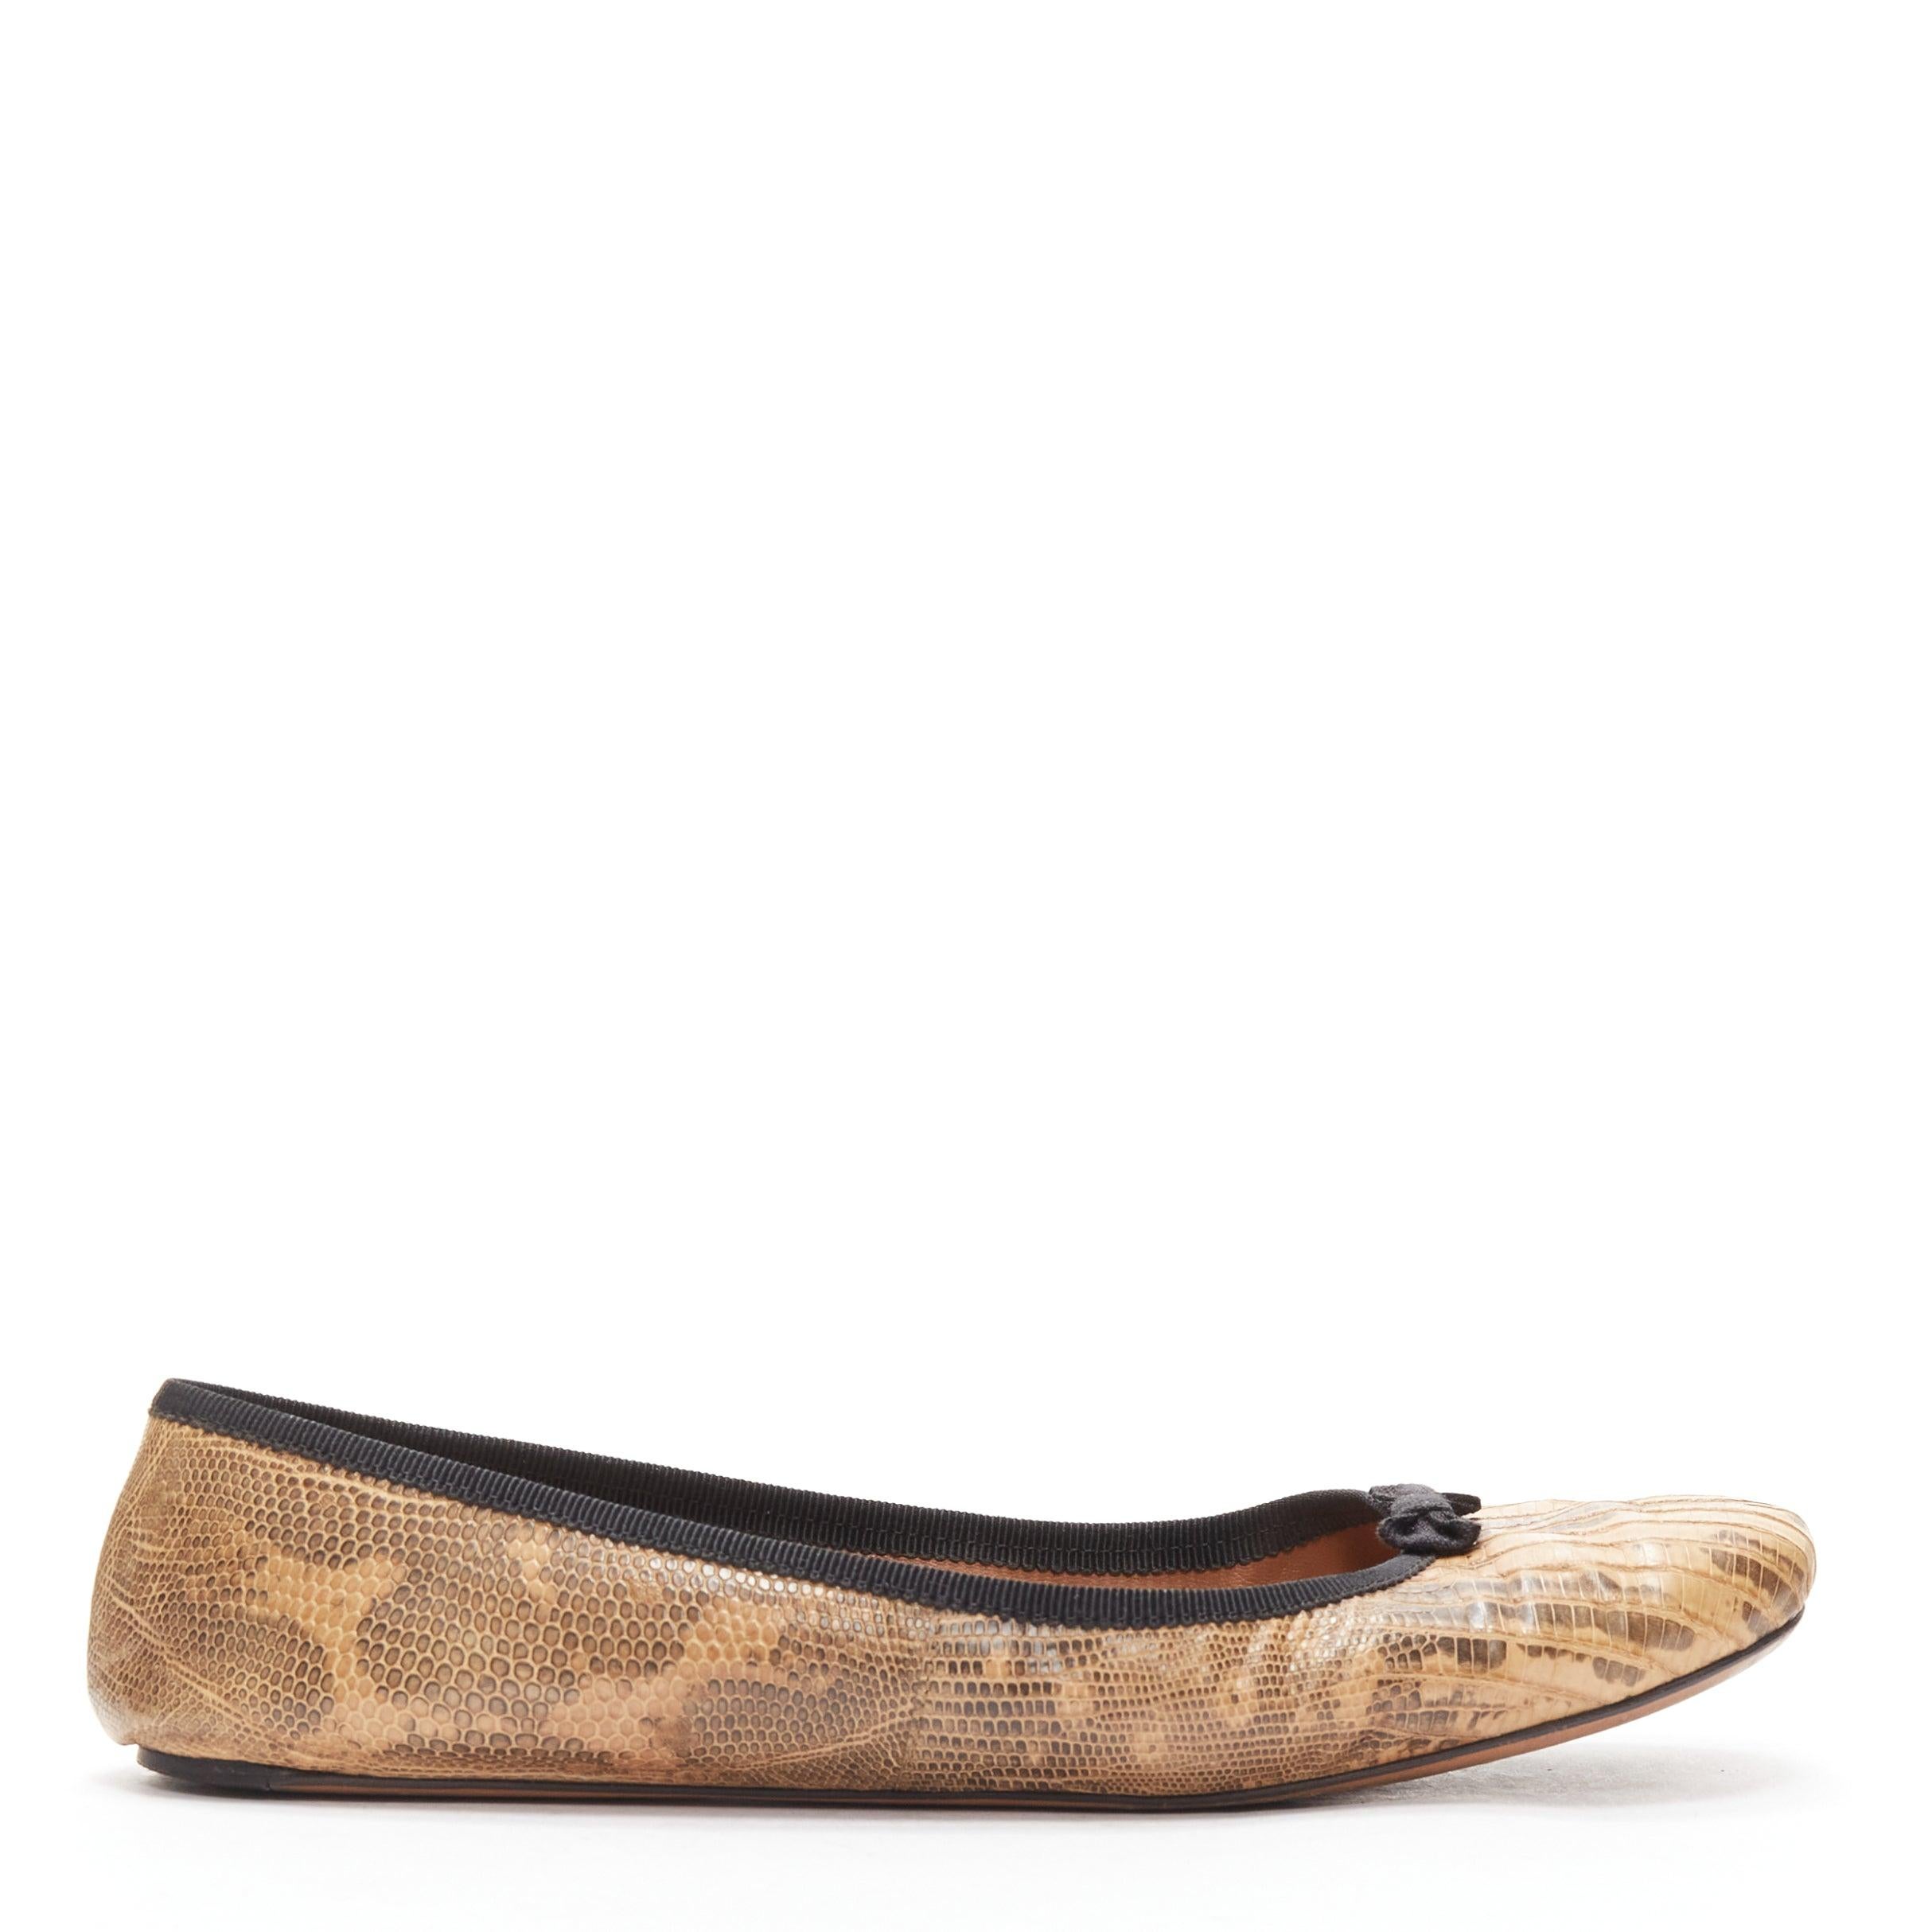 ALAIA brown scaled leather black bow trim ballerina flats shoes EU37
Reference: SNKO/A00371
Brand: Alaia
Material: Leather, Fabric
Color: Brown, Black
Pattern: Animal Print
Closure: Slip On
Lining: Brown Leather
Made in: Italy

CONDITION:
Condition: